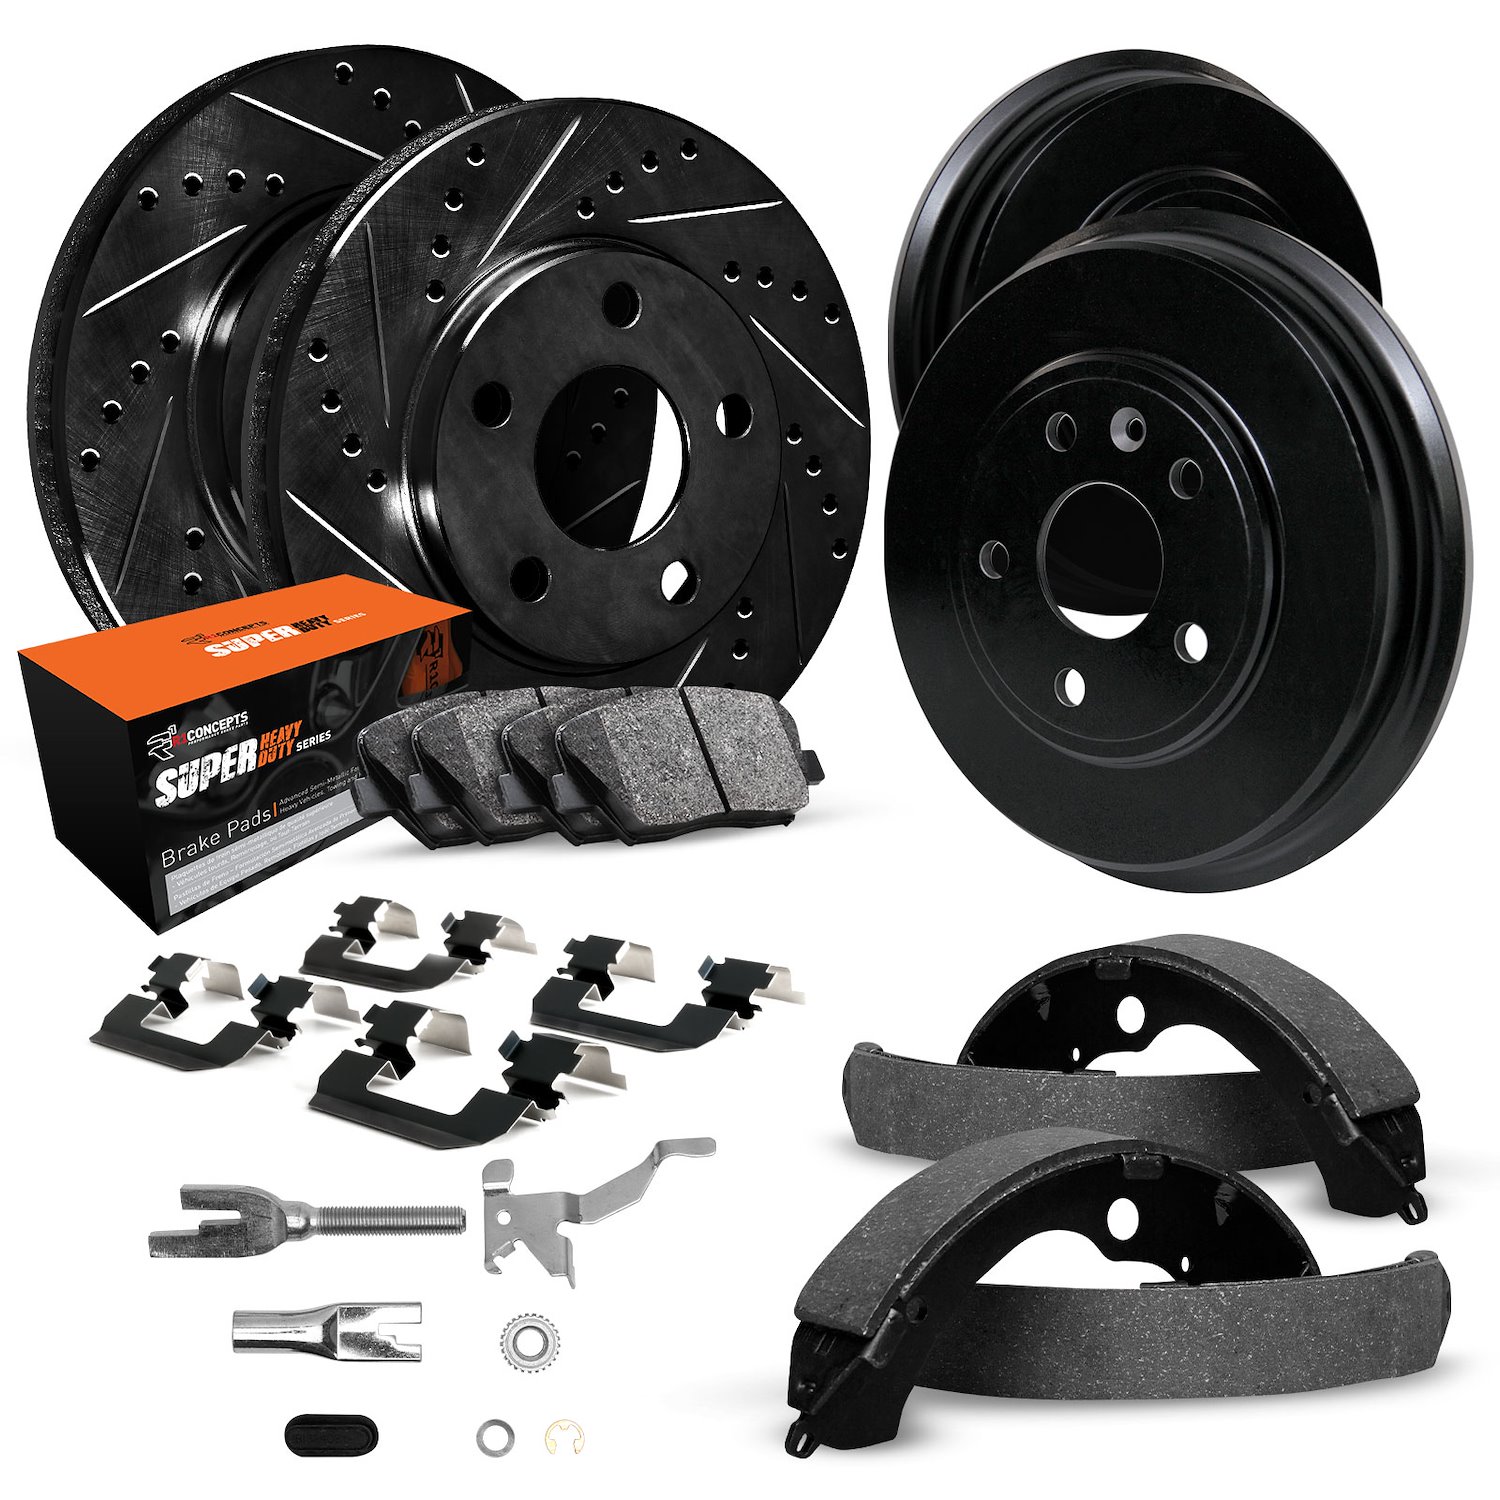 E-Line Drilled/Slotted Black Rotor & Drum Set w/Super-Duty Pads, Shoes, Hardware/Adjusters, 1995-1997 Ford/Lincoln/Mercury/Mazda